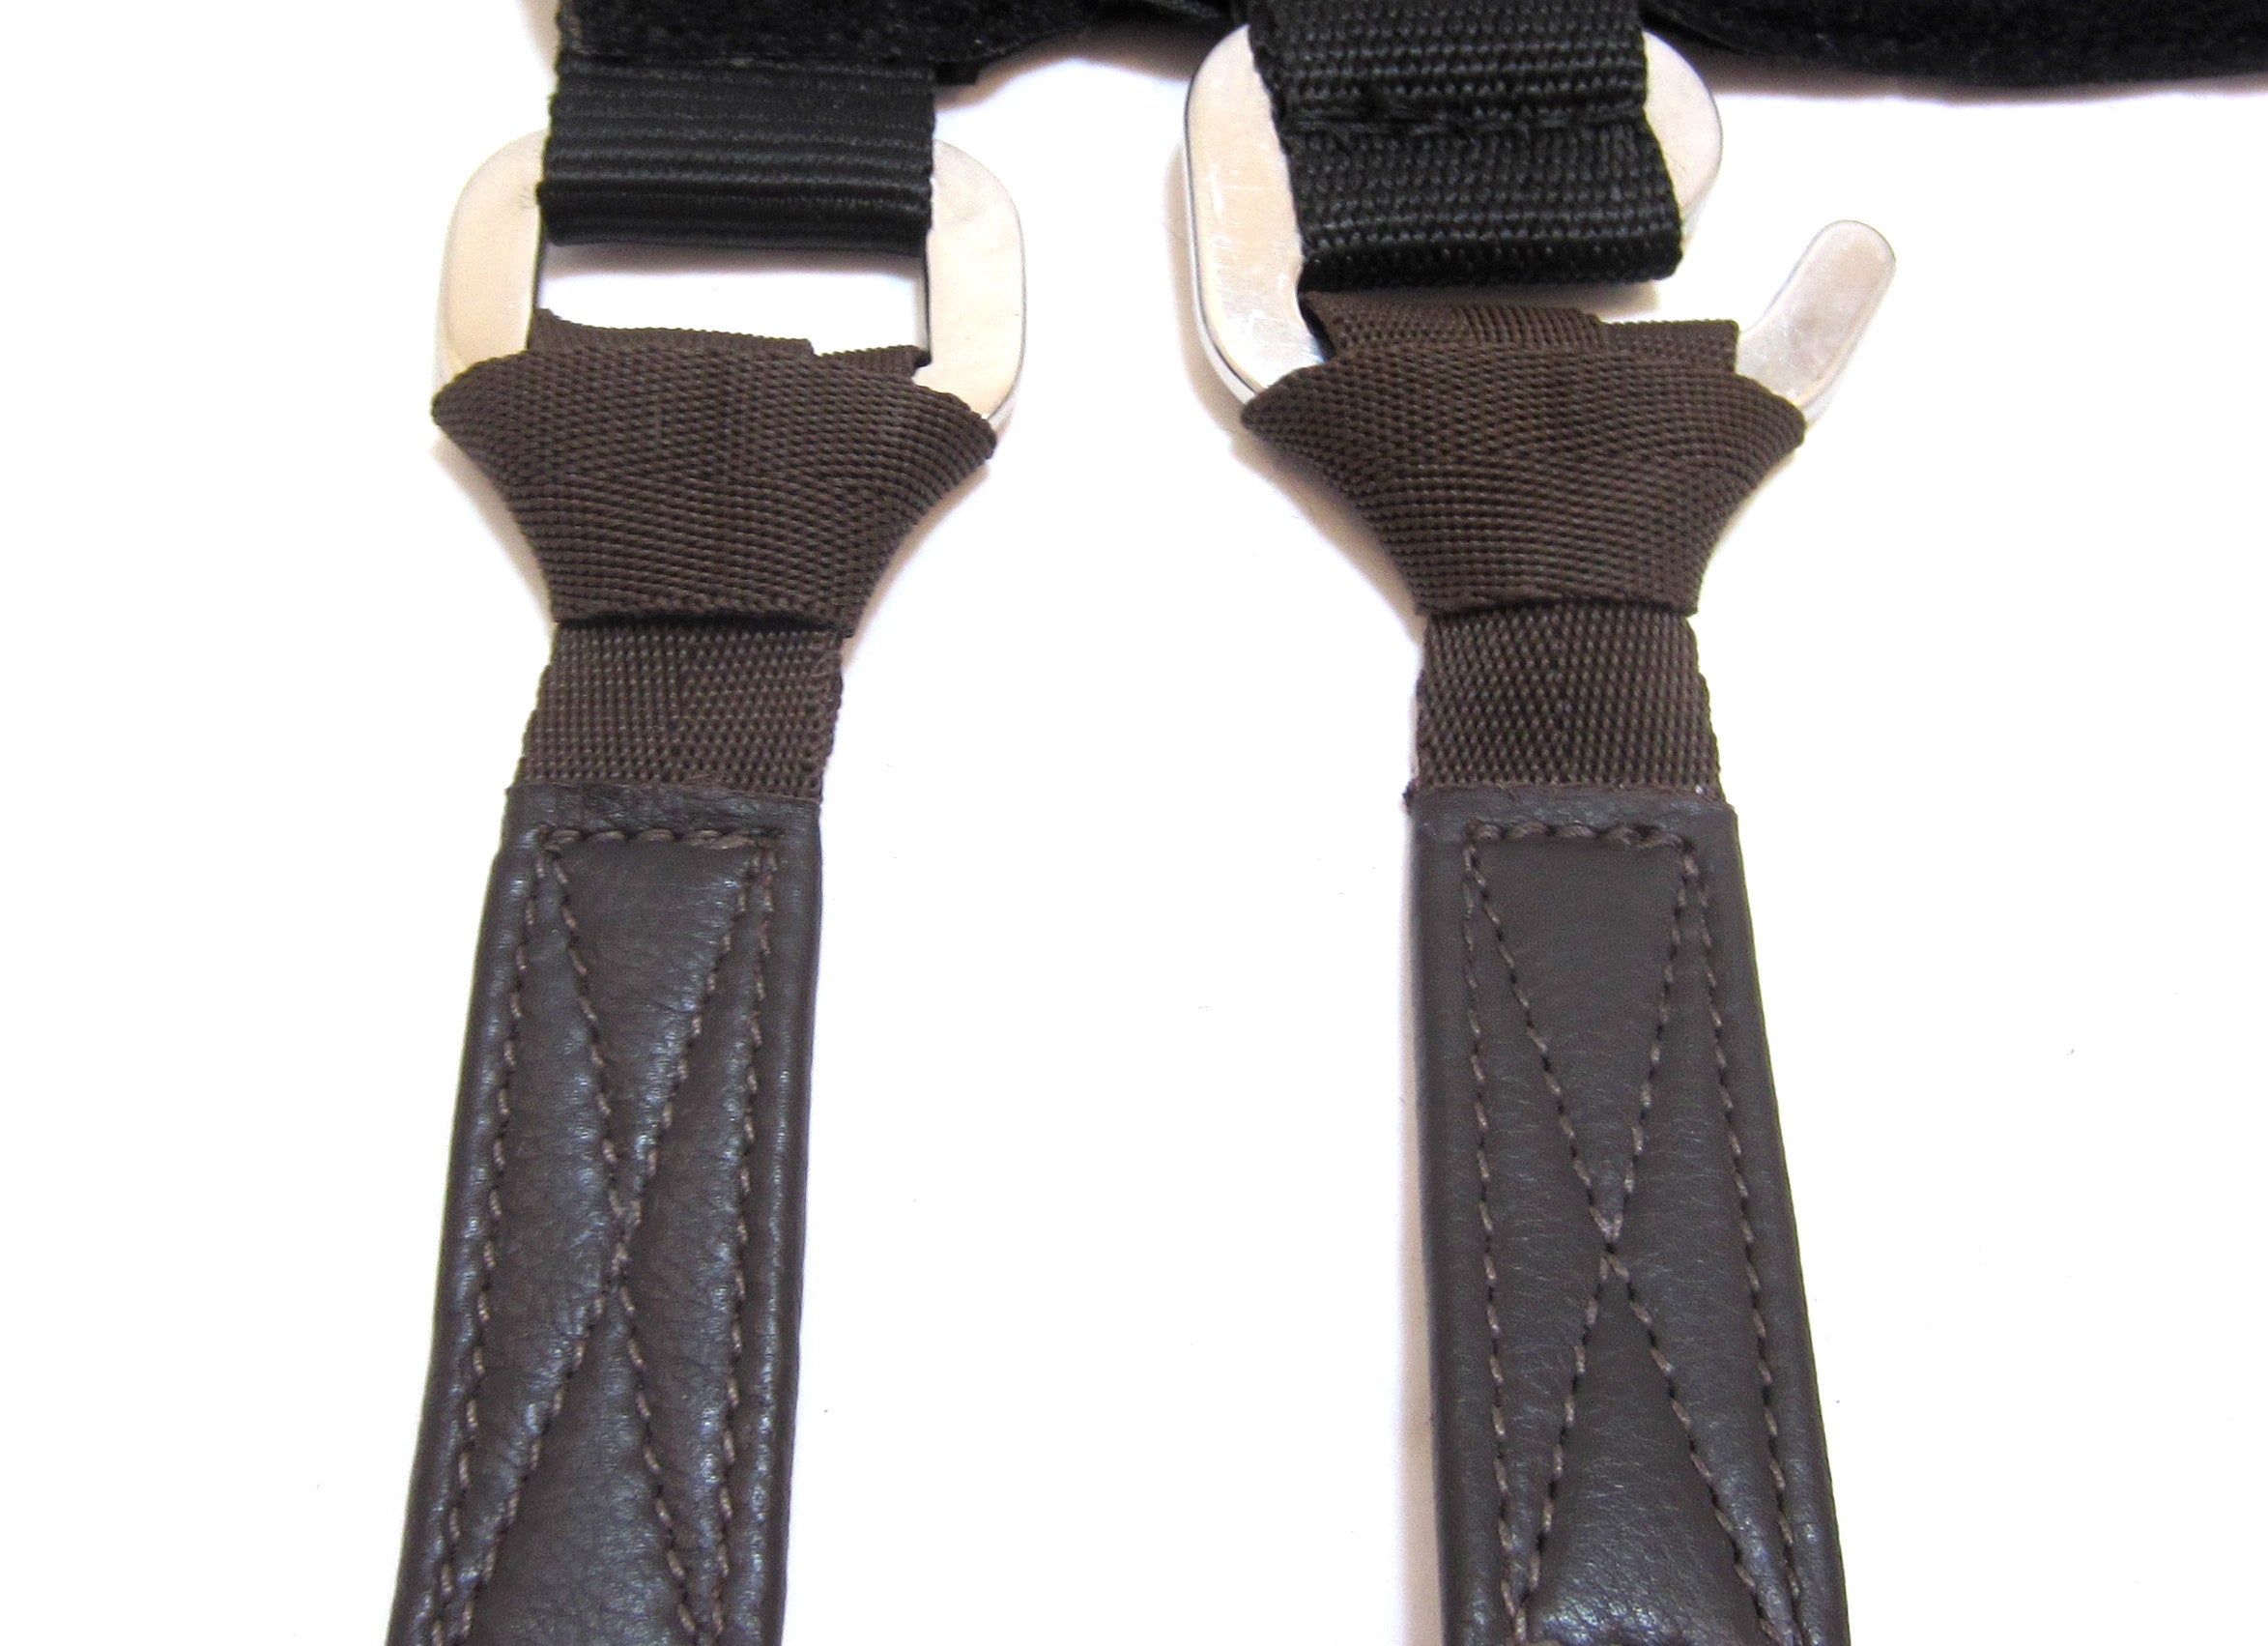 Mono stirrup leathers with buckleless extra thin suspension